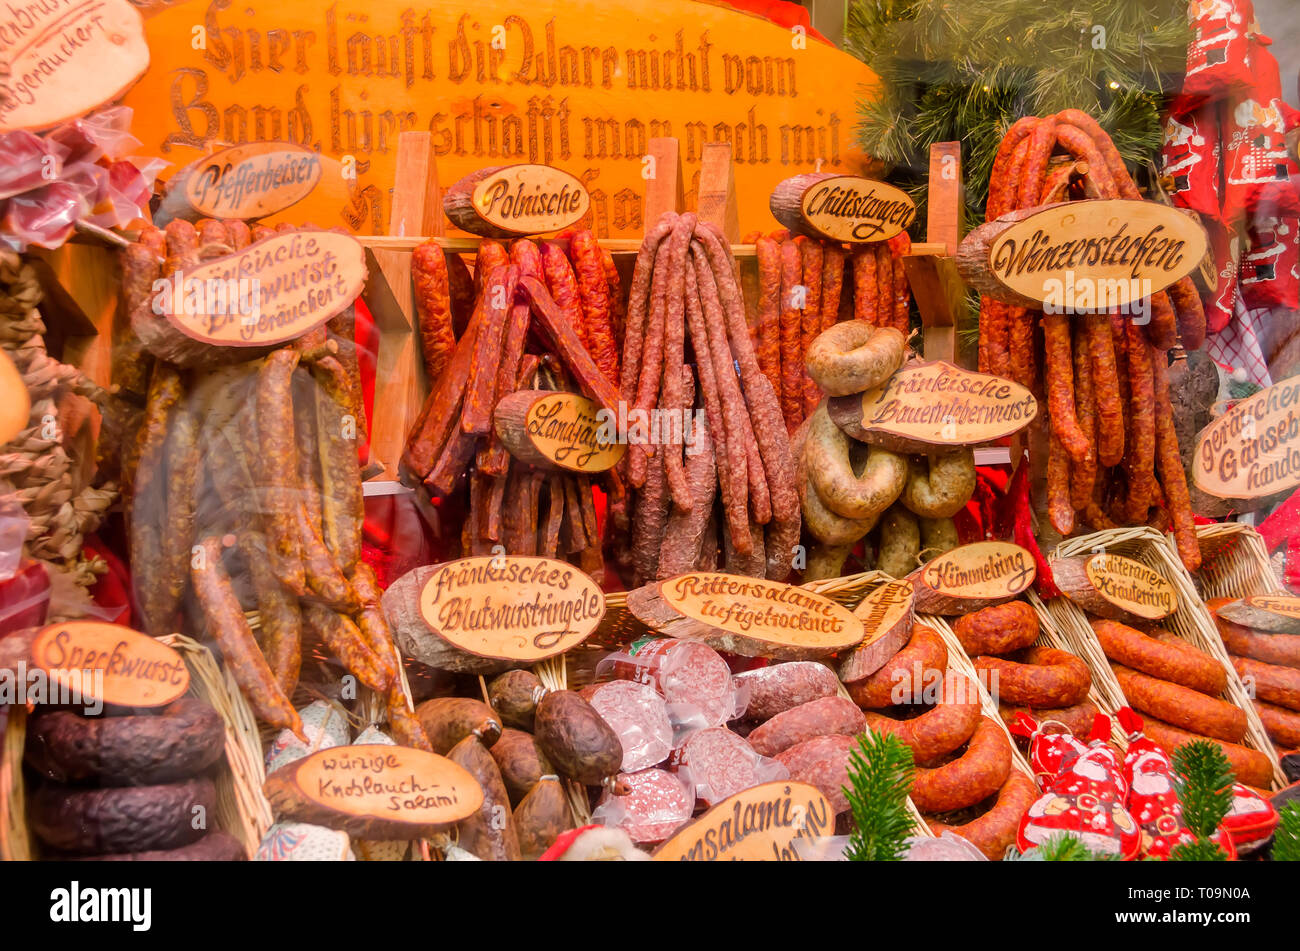 German sausages, meats and bread in Christmas window display Rothenburg  Germany Stock Photo